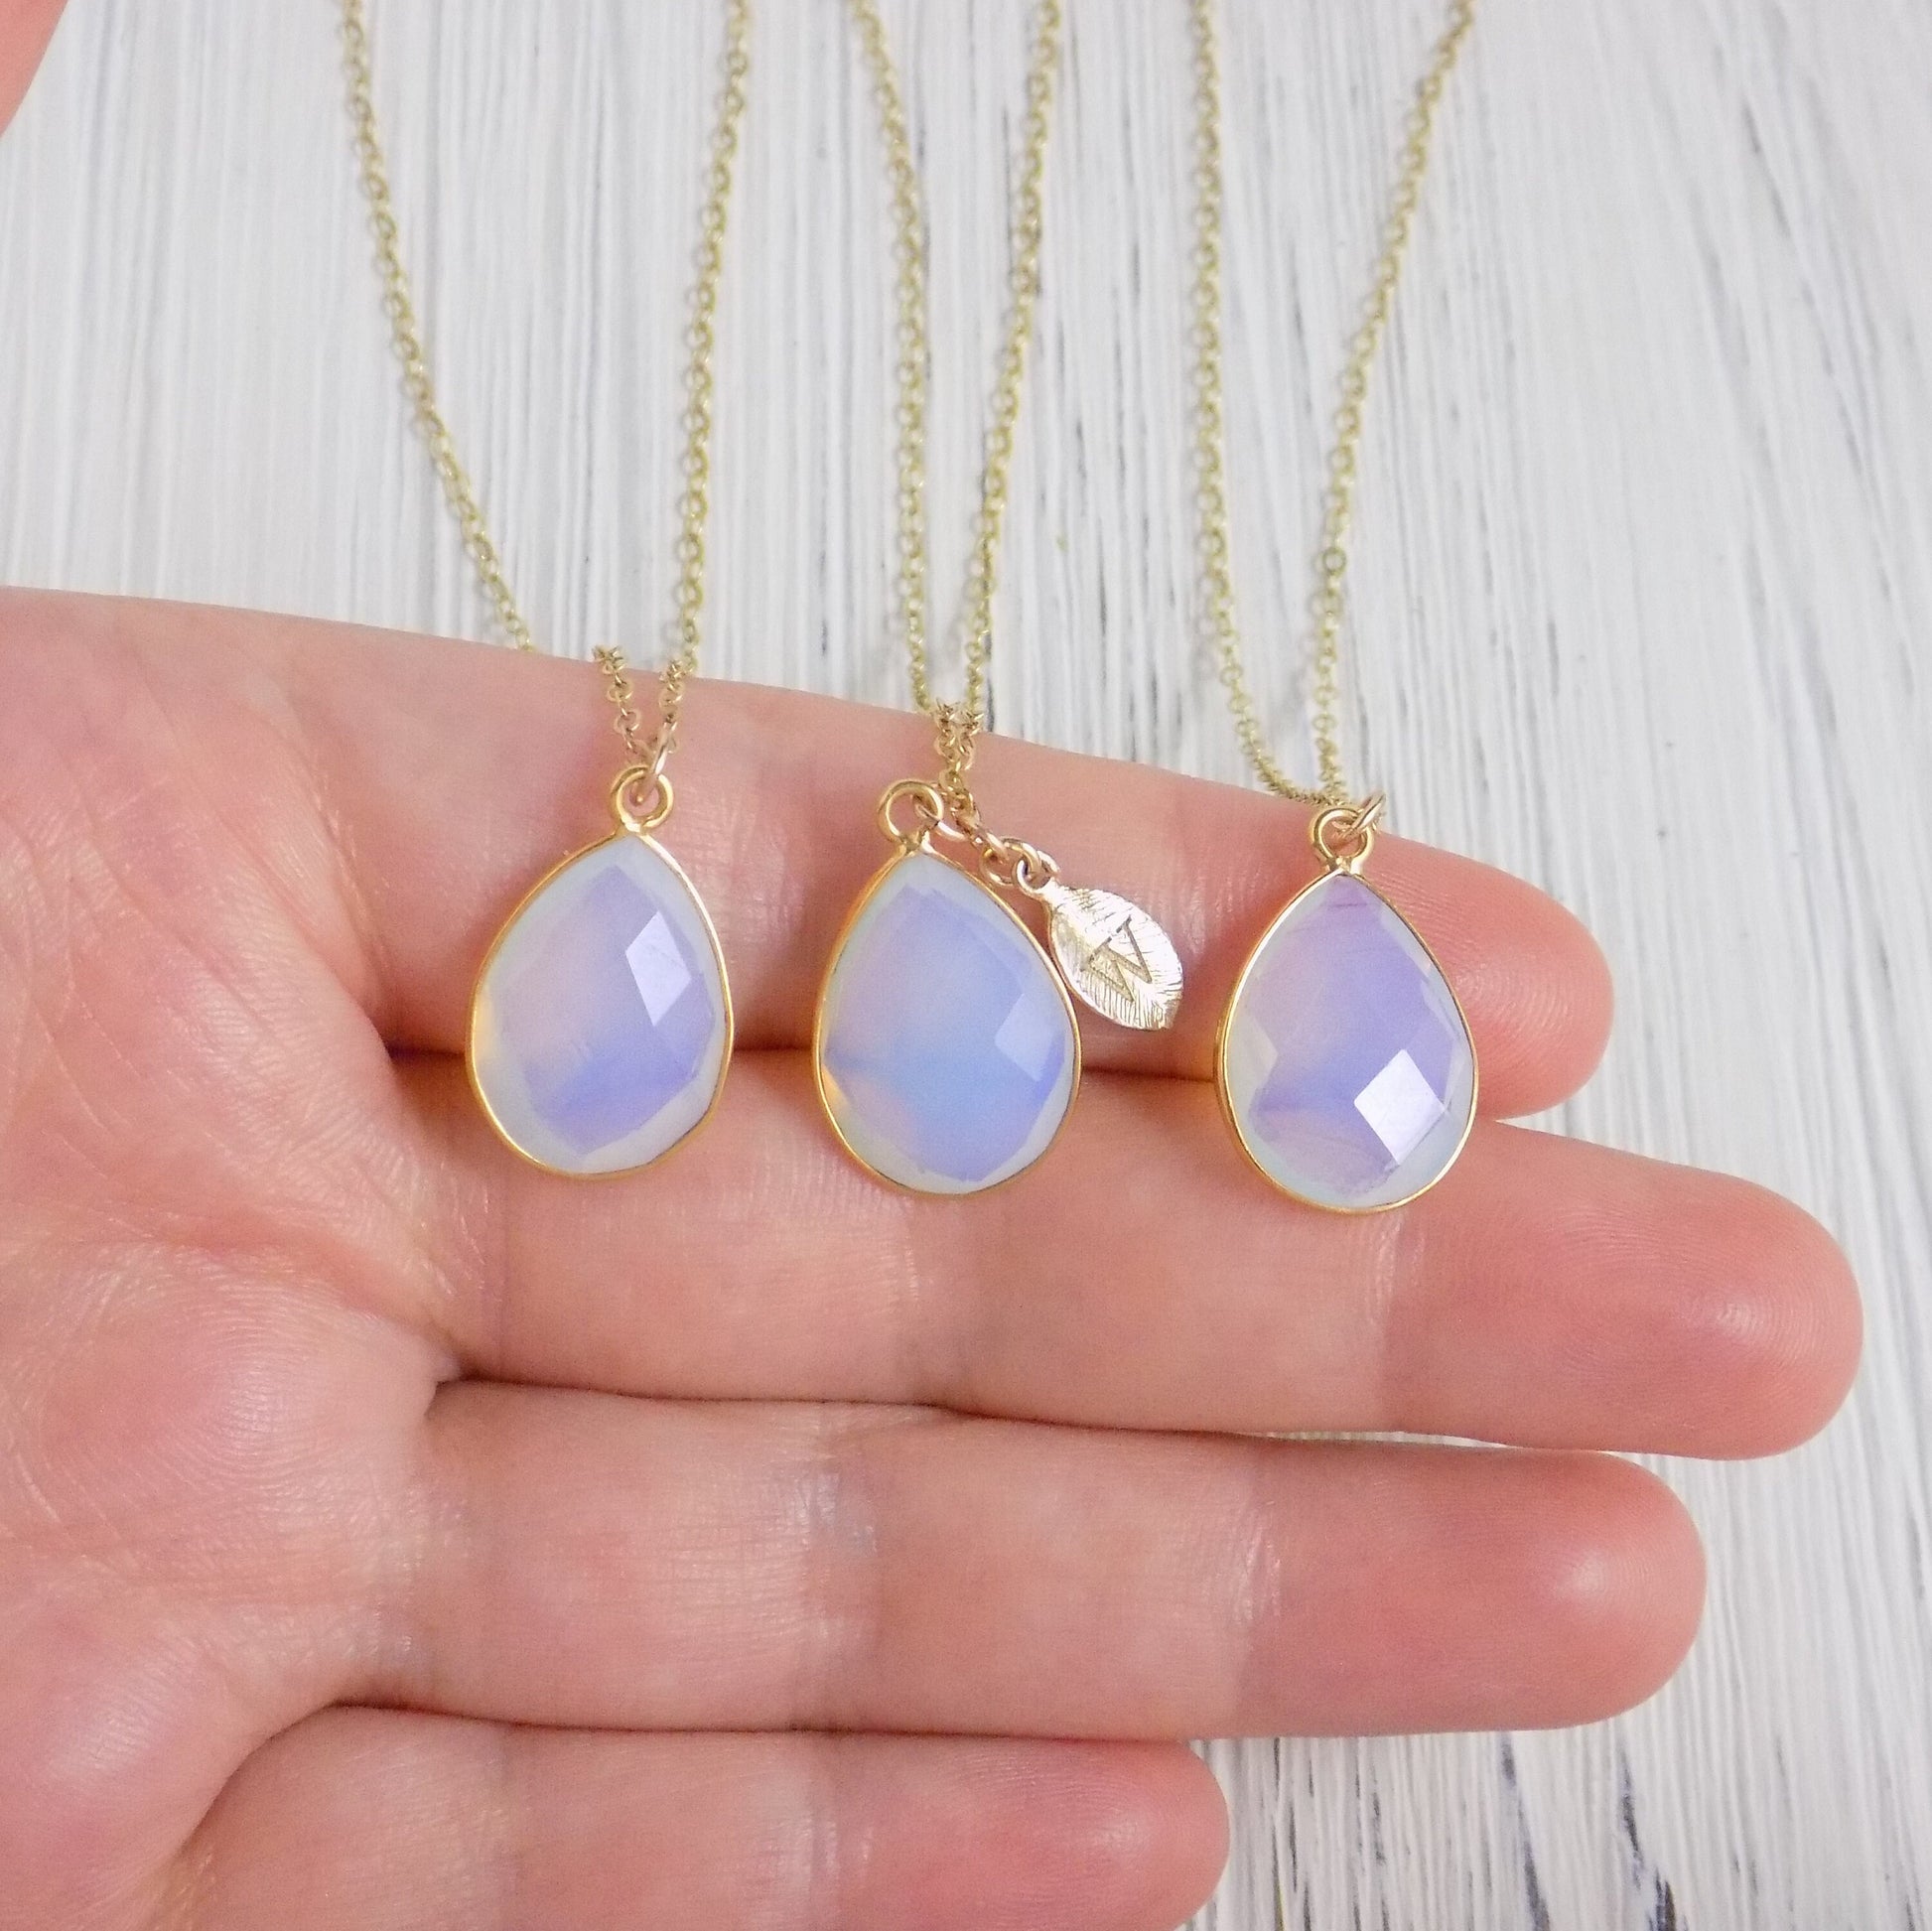 Valentines Day Gift, Personalized Opal Necklace on 14K Gold Filled Chain with Stamped Initial Charm, Opalite Pendant, M3-68